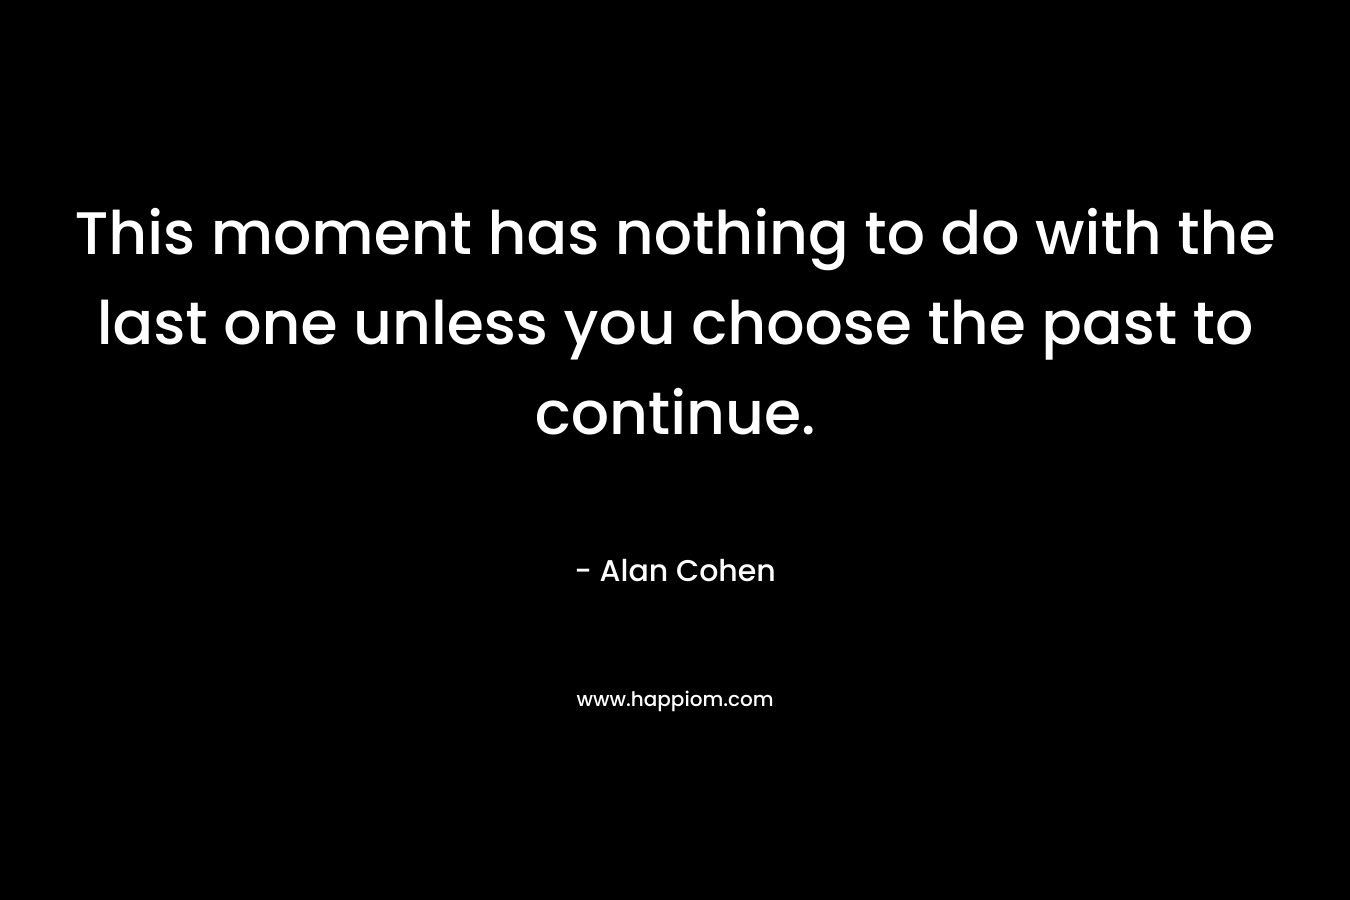 This moment has nothing to do with the last one unless you choose the past to continue. – Alan Cohen